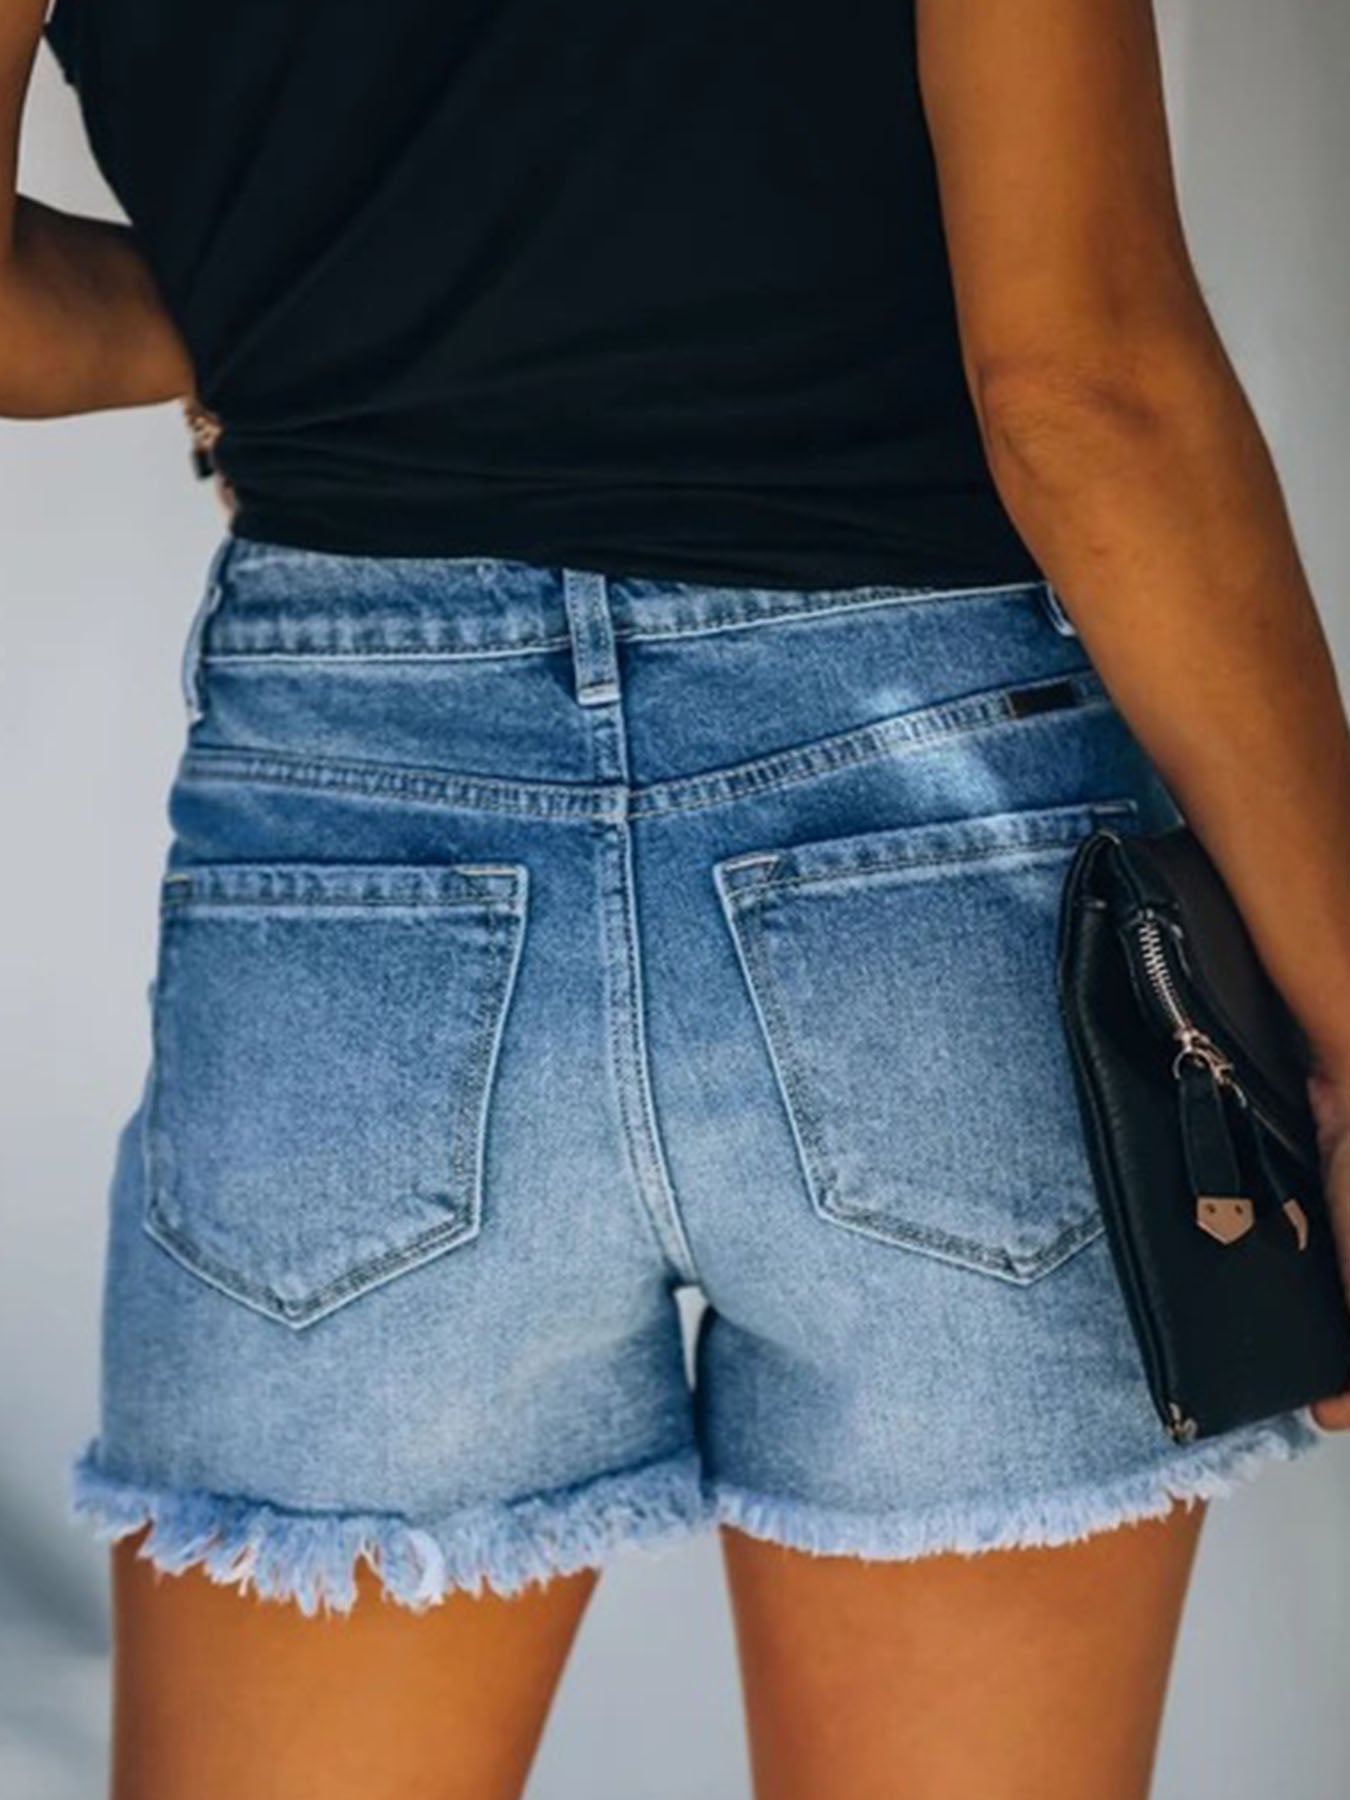 Vorioal Ripped Jeans Shorts